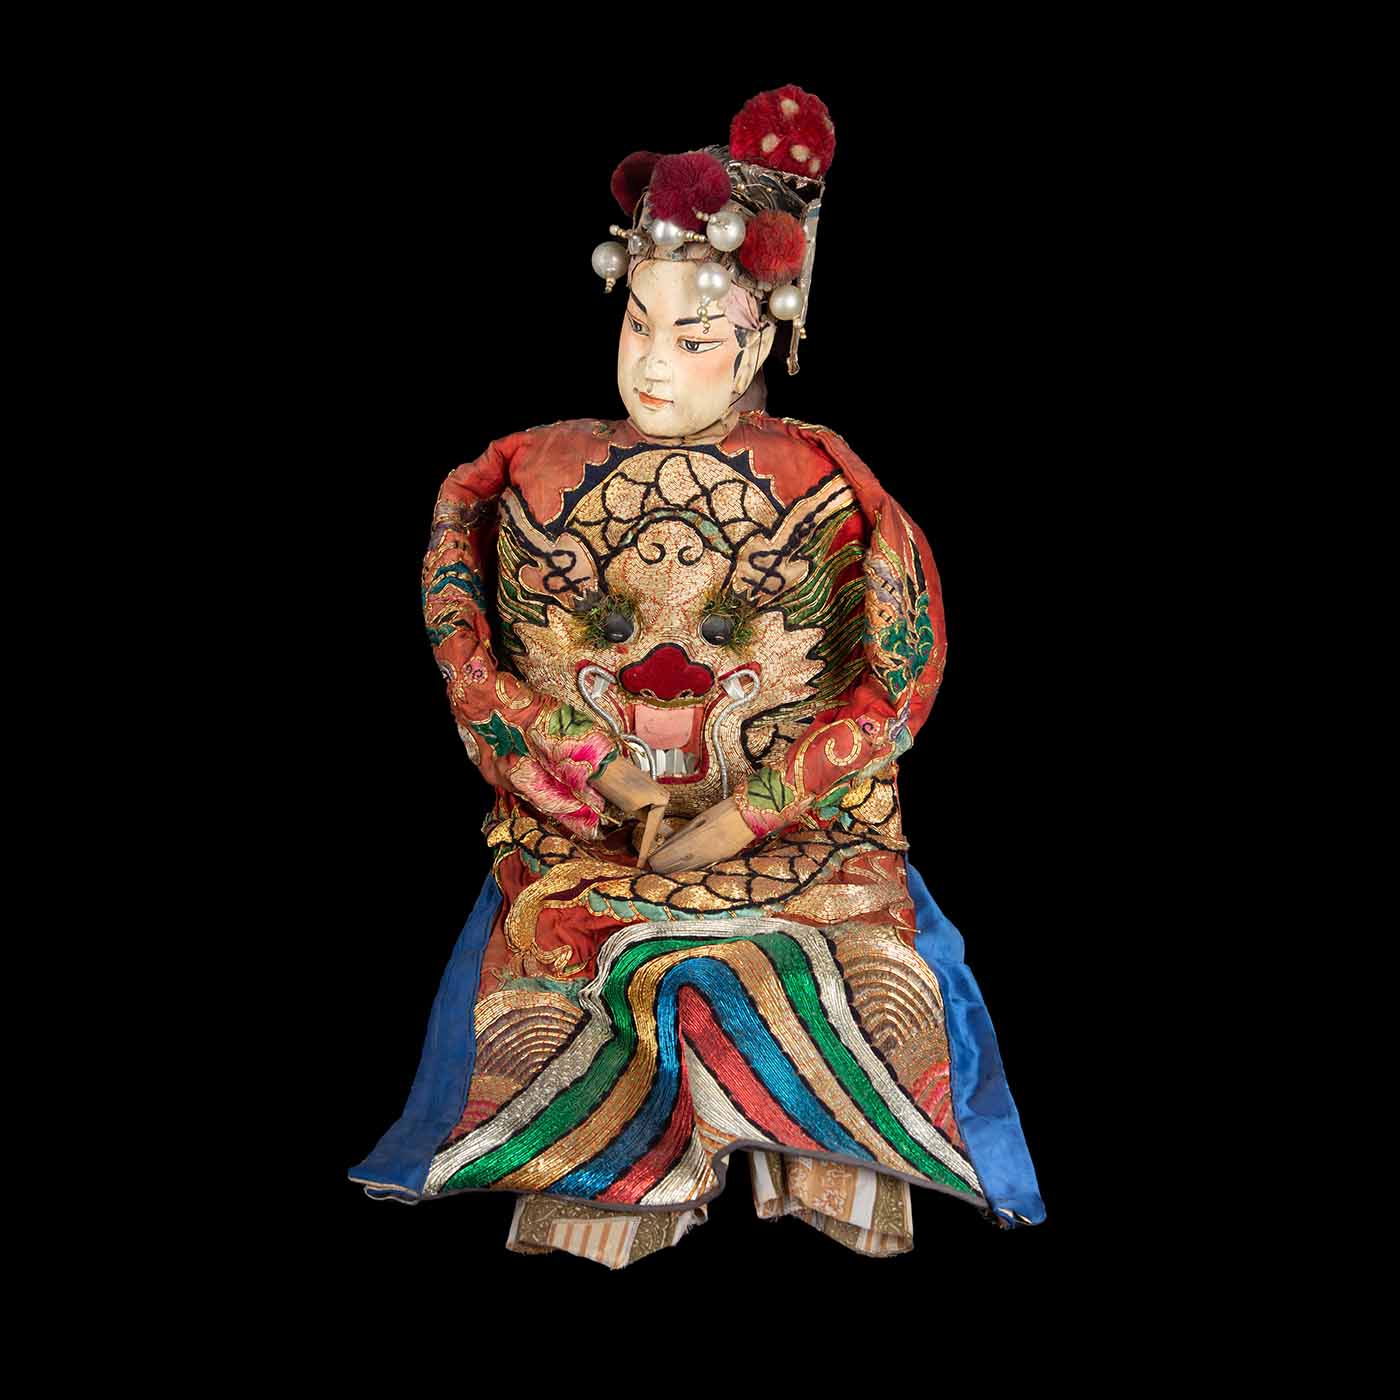 Chinese Opera Theatre Marionette, Red Silk Robe, Pink Pom Poms